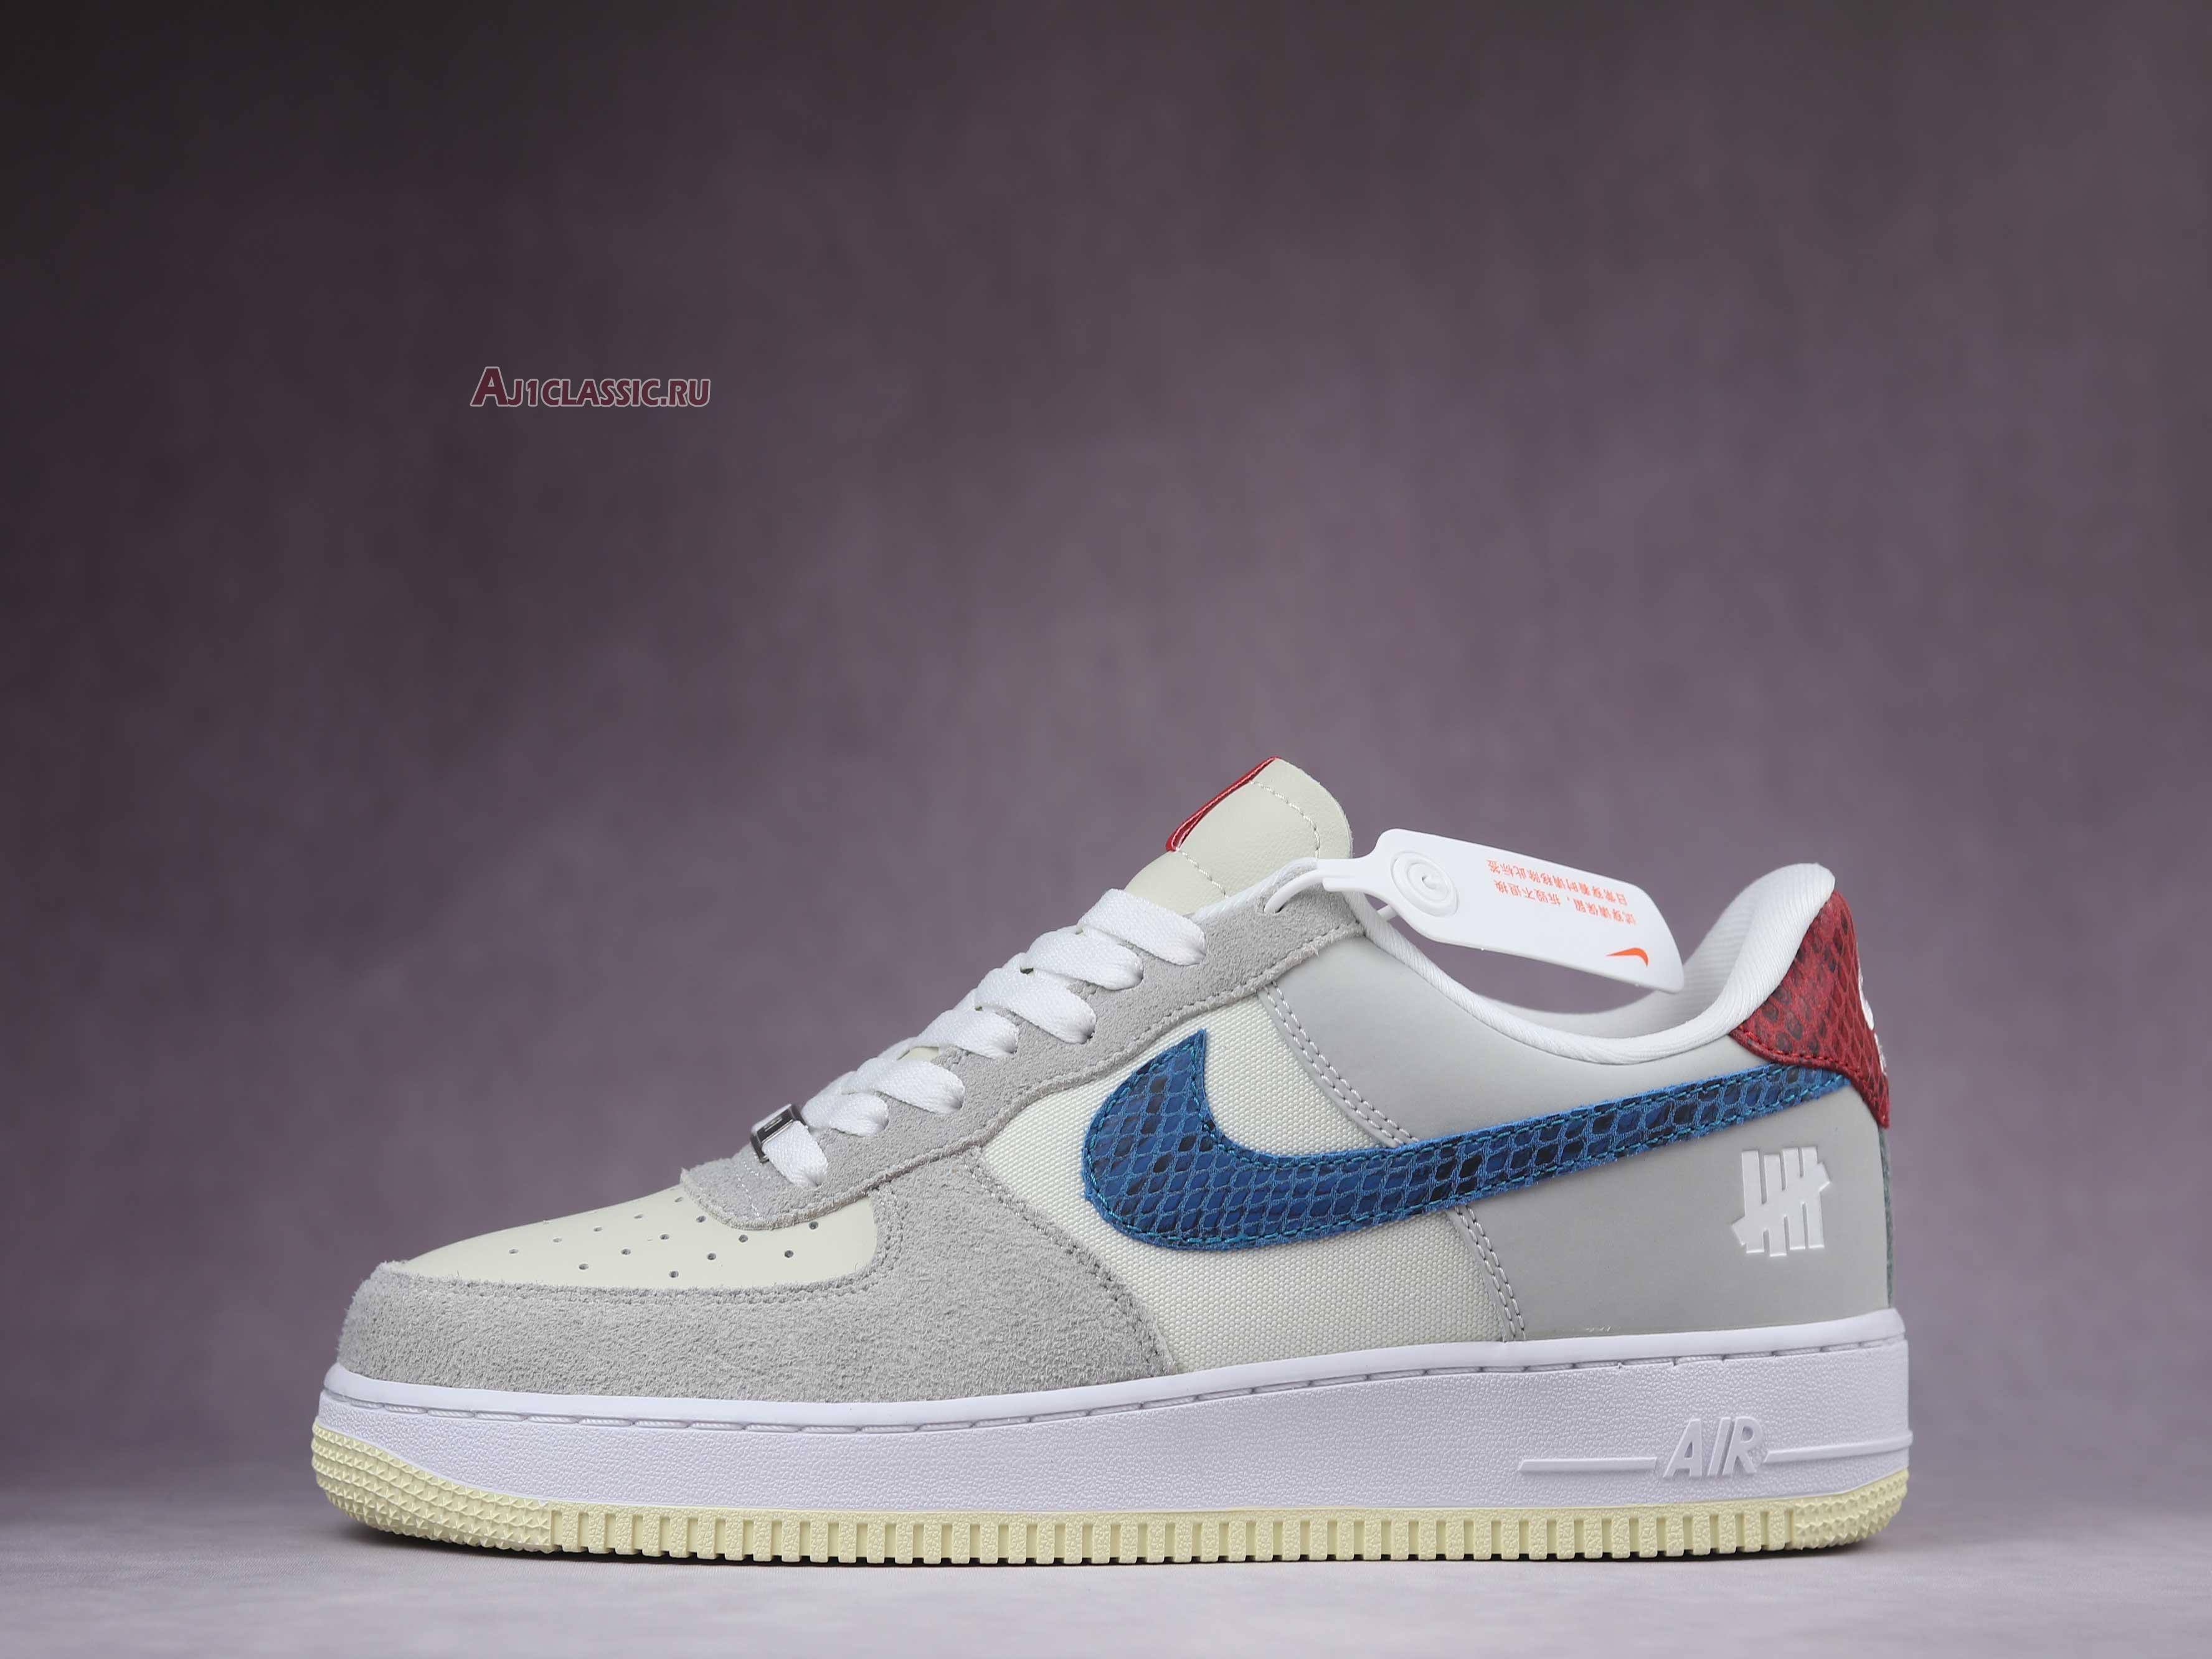 Undefeated x Air Force 1 Low "5 On It" DM8461-001